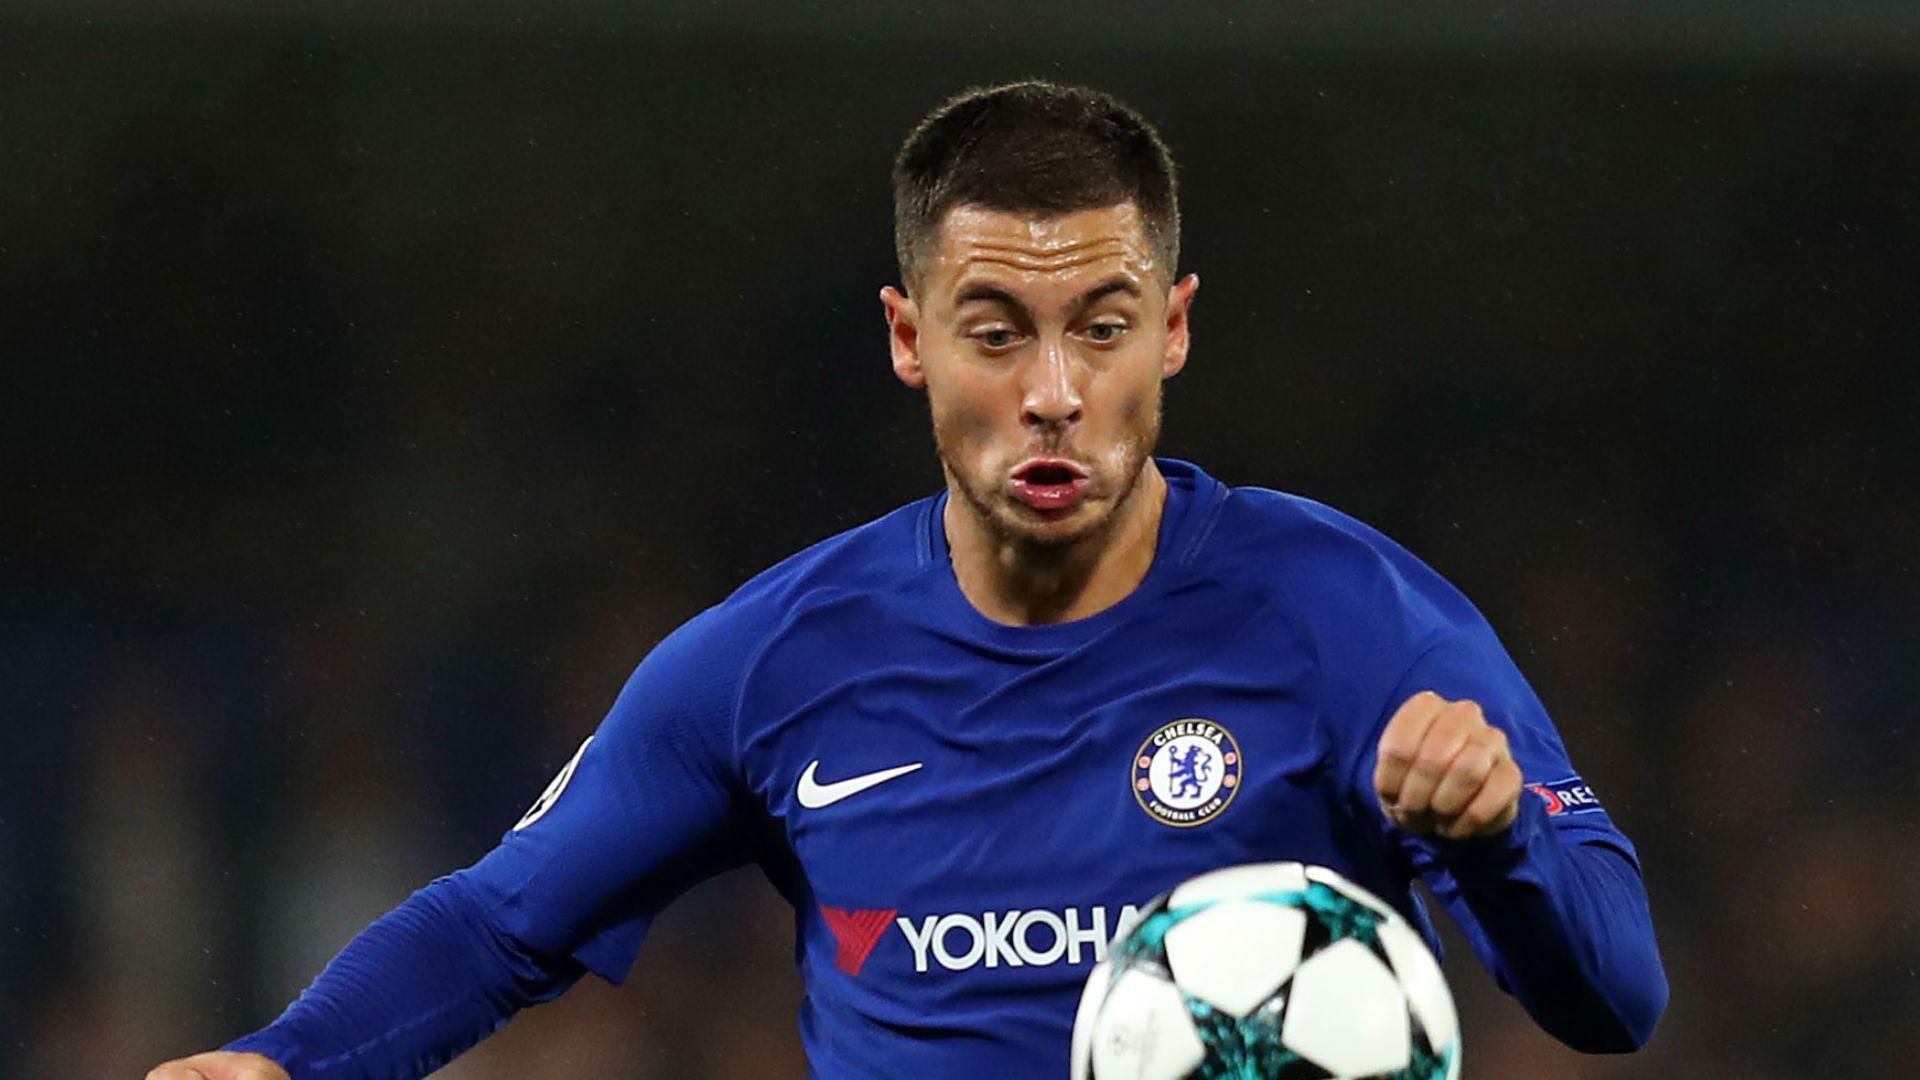 Chelsea news: Eden Hazard confident injury issues are in the past